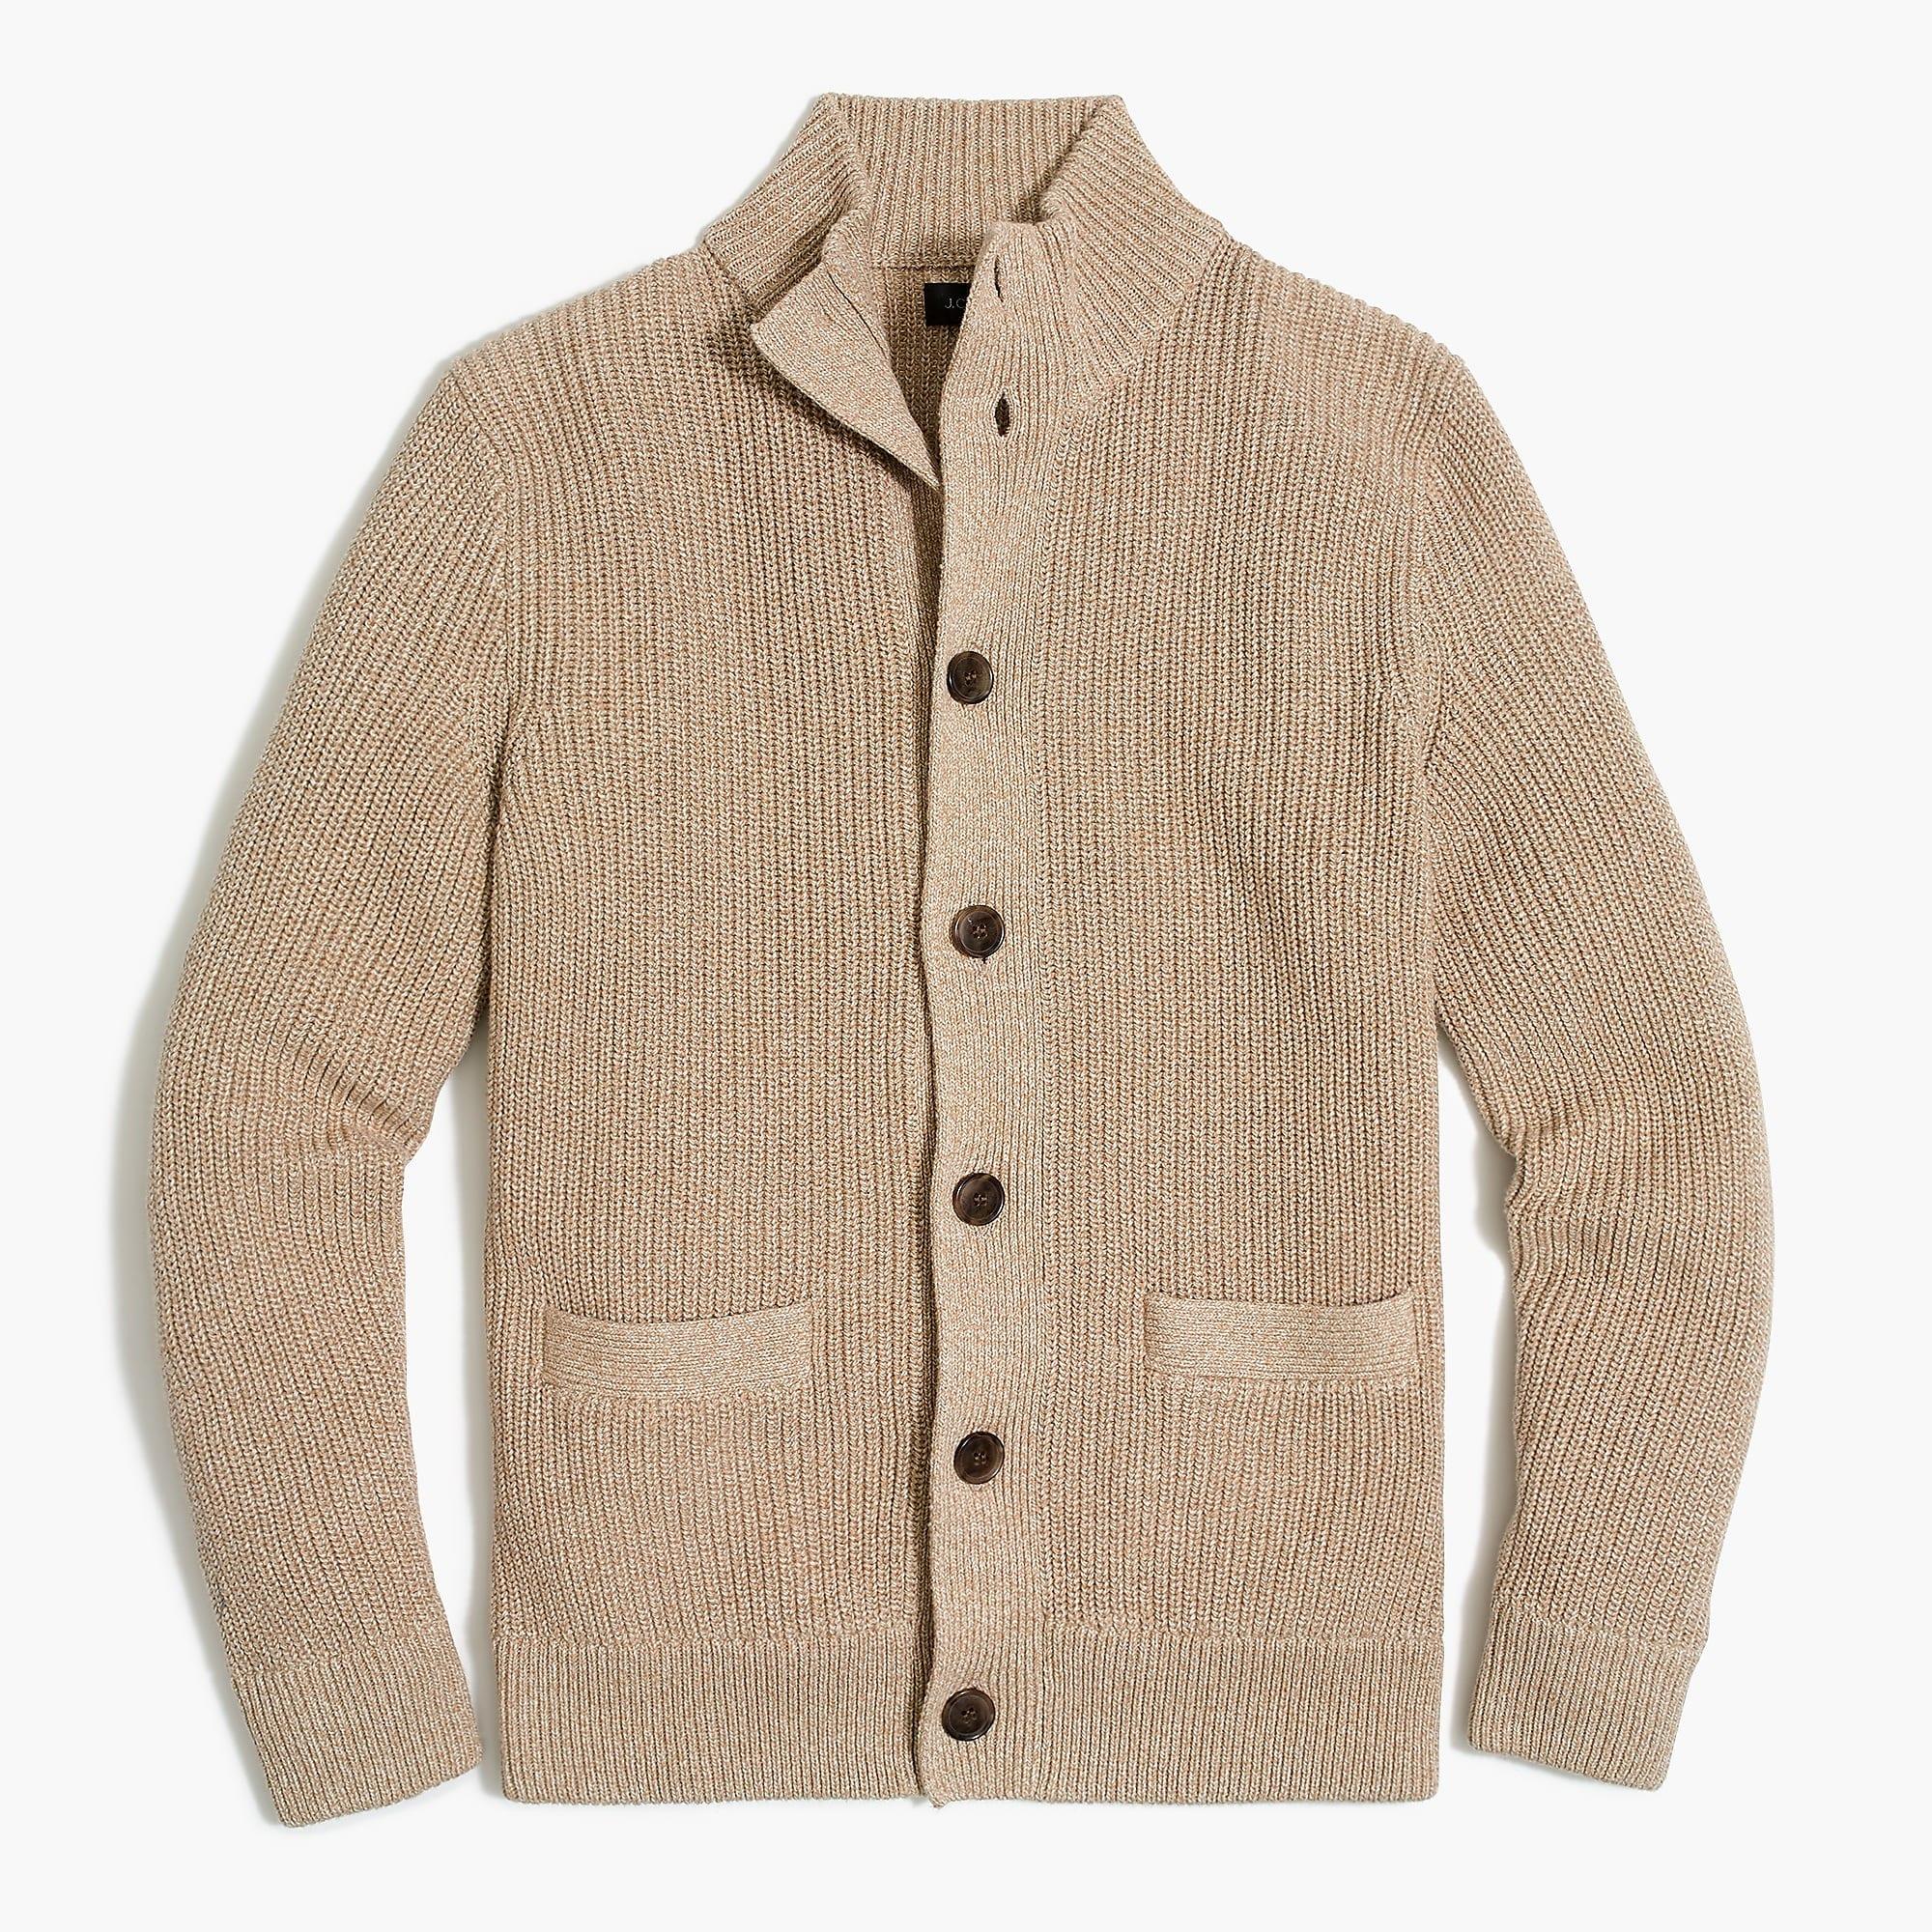 J.Crew Marled Cotton Sweater Cardigan in Natural for Men - Lyst